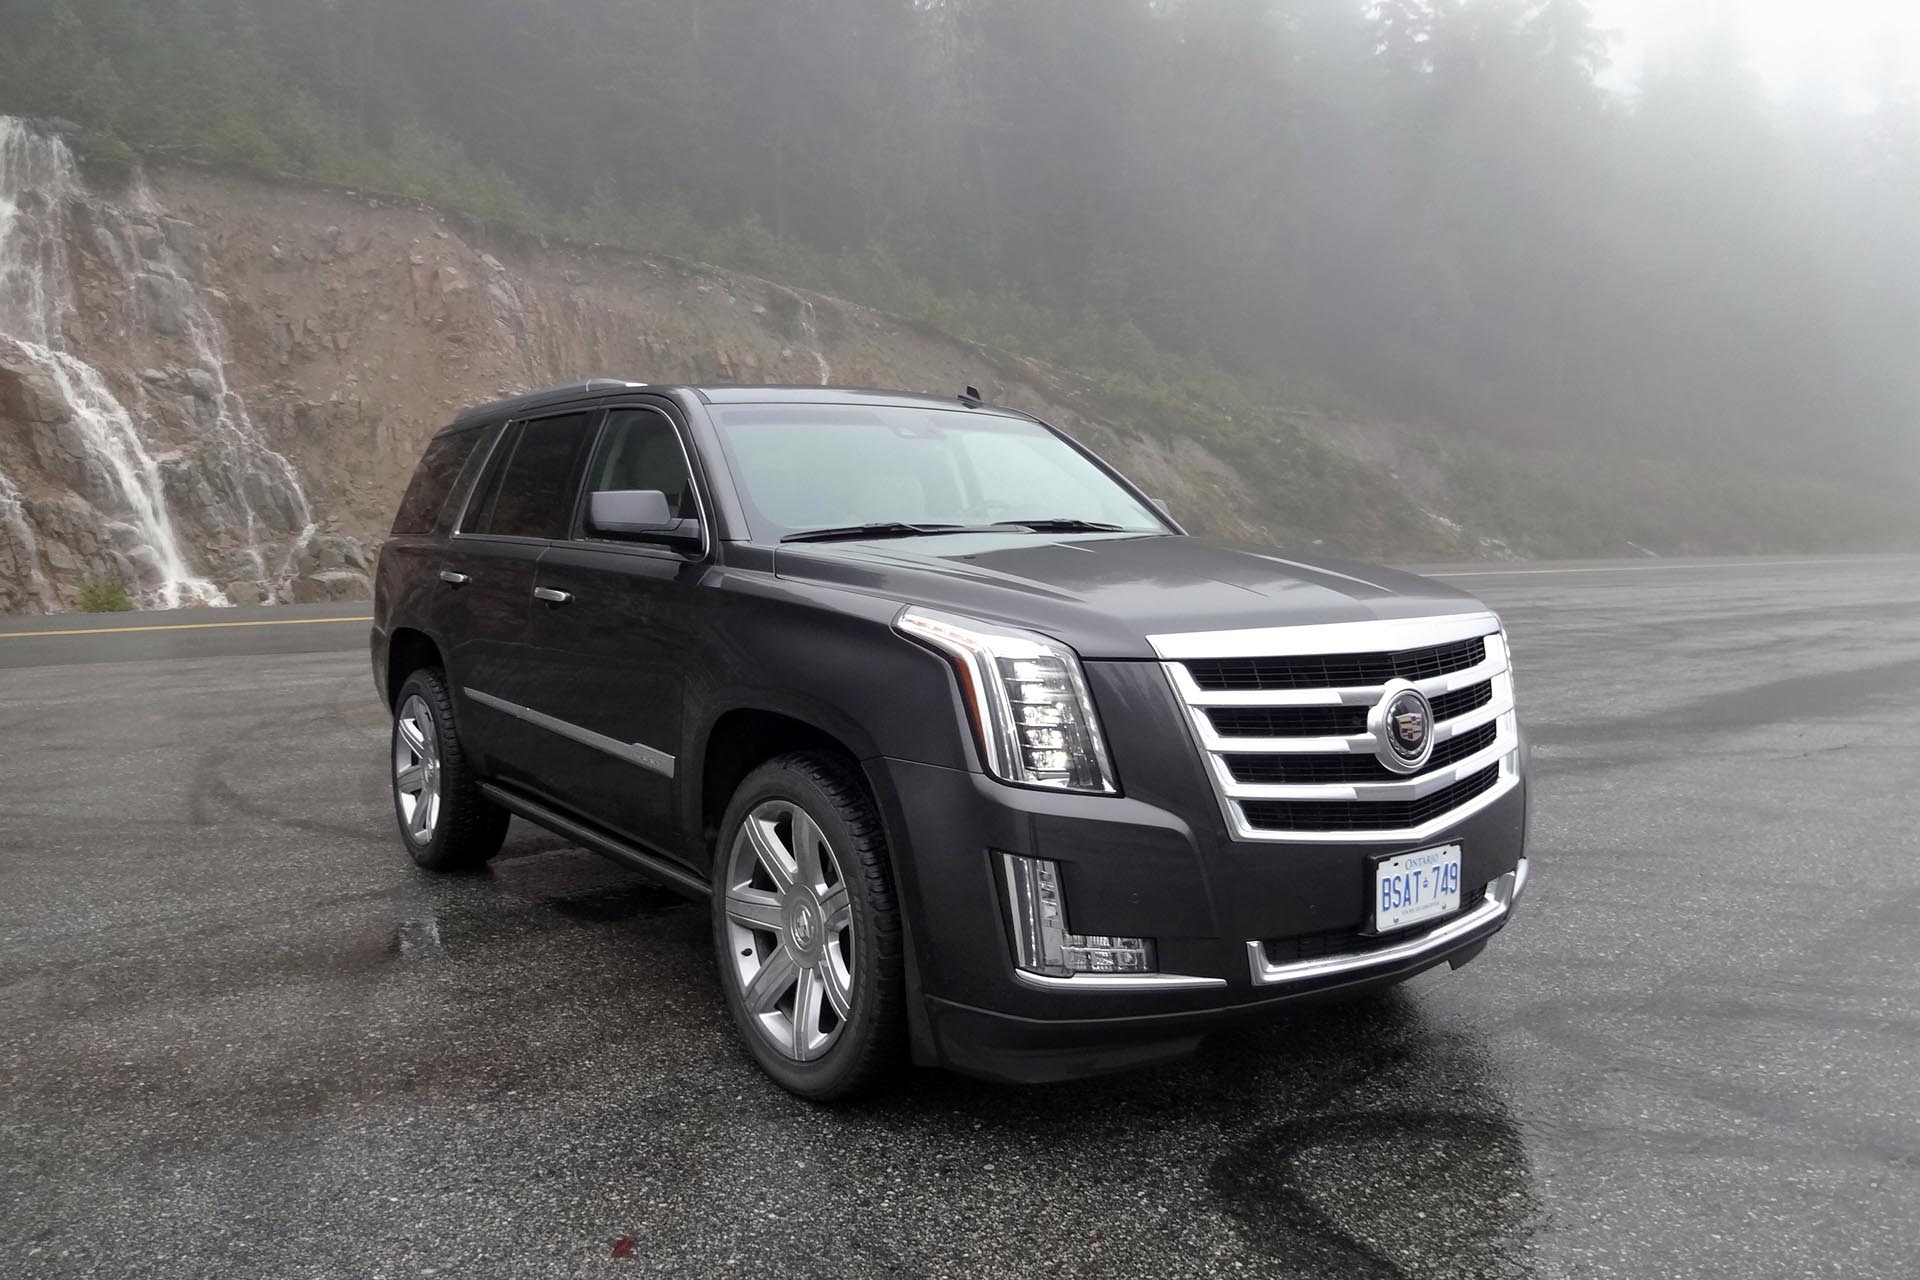 It's easy to deal with a situation if you just don't care, and the Cadillac Escalade makes it easy not to care about traffic. You're bigger than everyone else. You sit way up high with a commanding view. You've got all-wheel drive in case the weather turns nasty. You've got available adaptive cruise control and other driving aids to ease the burden of navigating dense traffic. You've got comfortable leather seating and a superb-sounding infotainment system with all the bells and whistles. Yep, provided you can afford the steep price of entry and the hefty ongoing fuel bills, the Escalade does a fine job of insulating you from the slings and arrows of the daily commute.